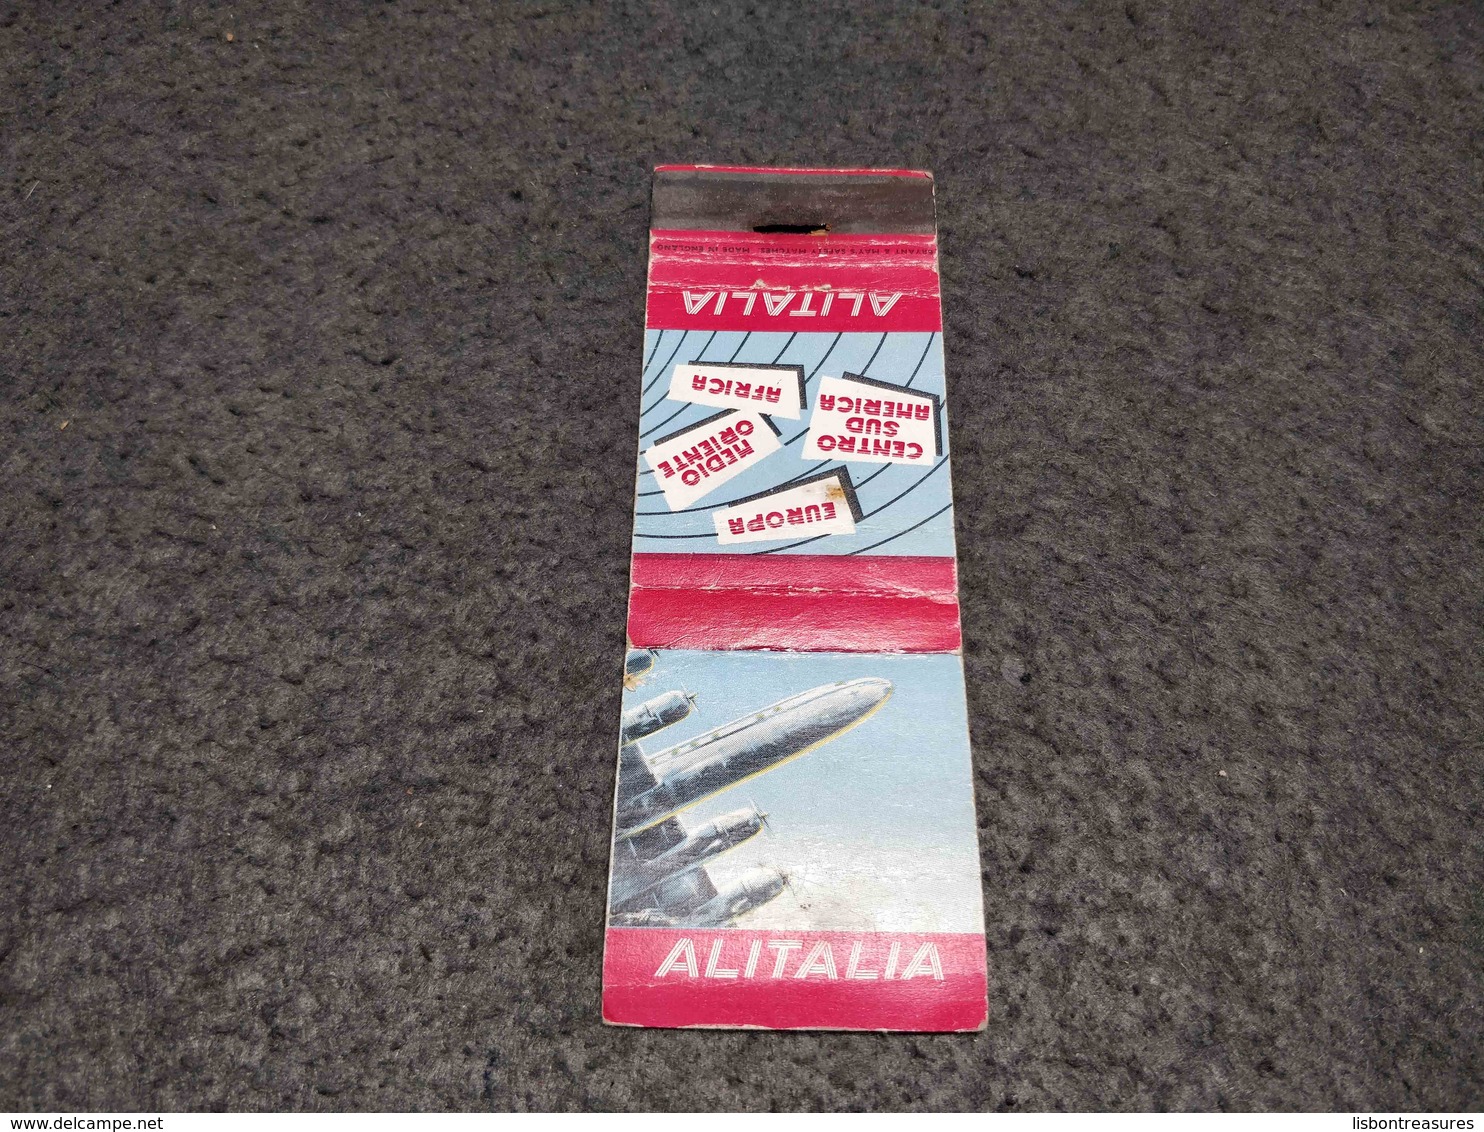 ANTIQUE MATCHBOX MATCHES LABEL ADVERTISING ALITALIA AIRLINES ITALY Nº2 - Matchboxes